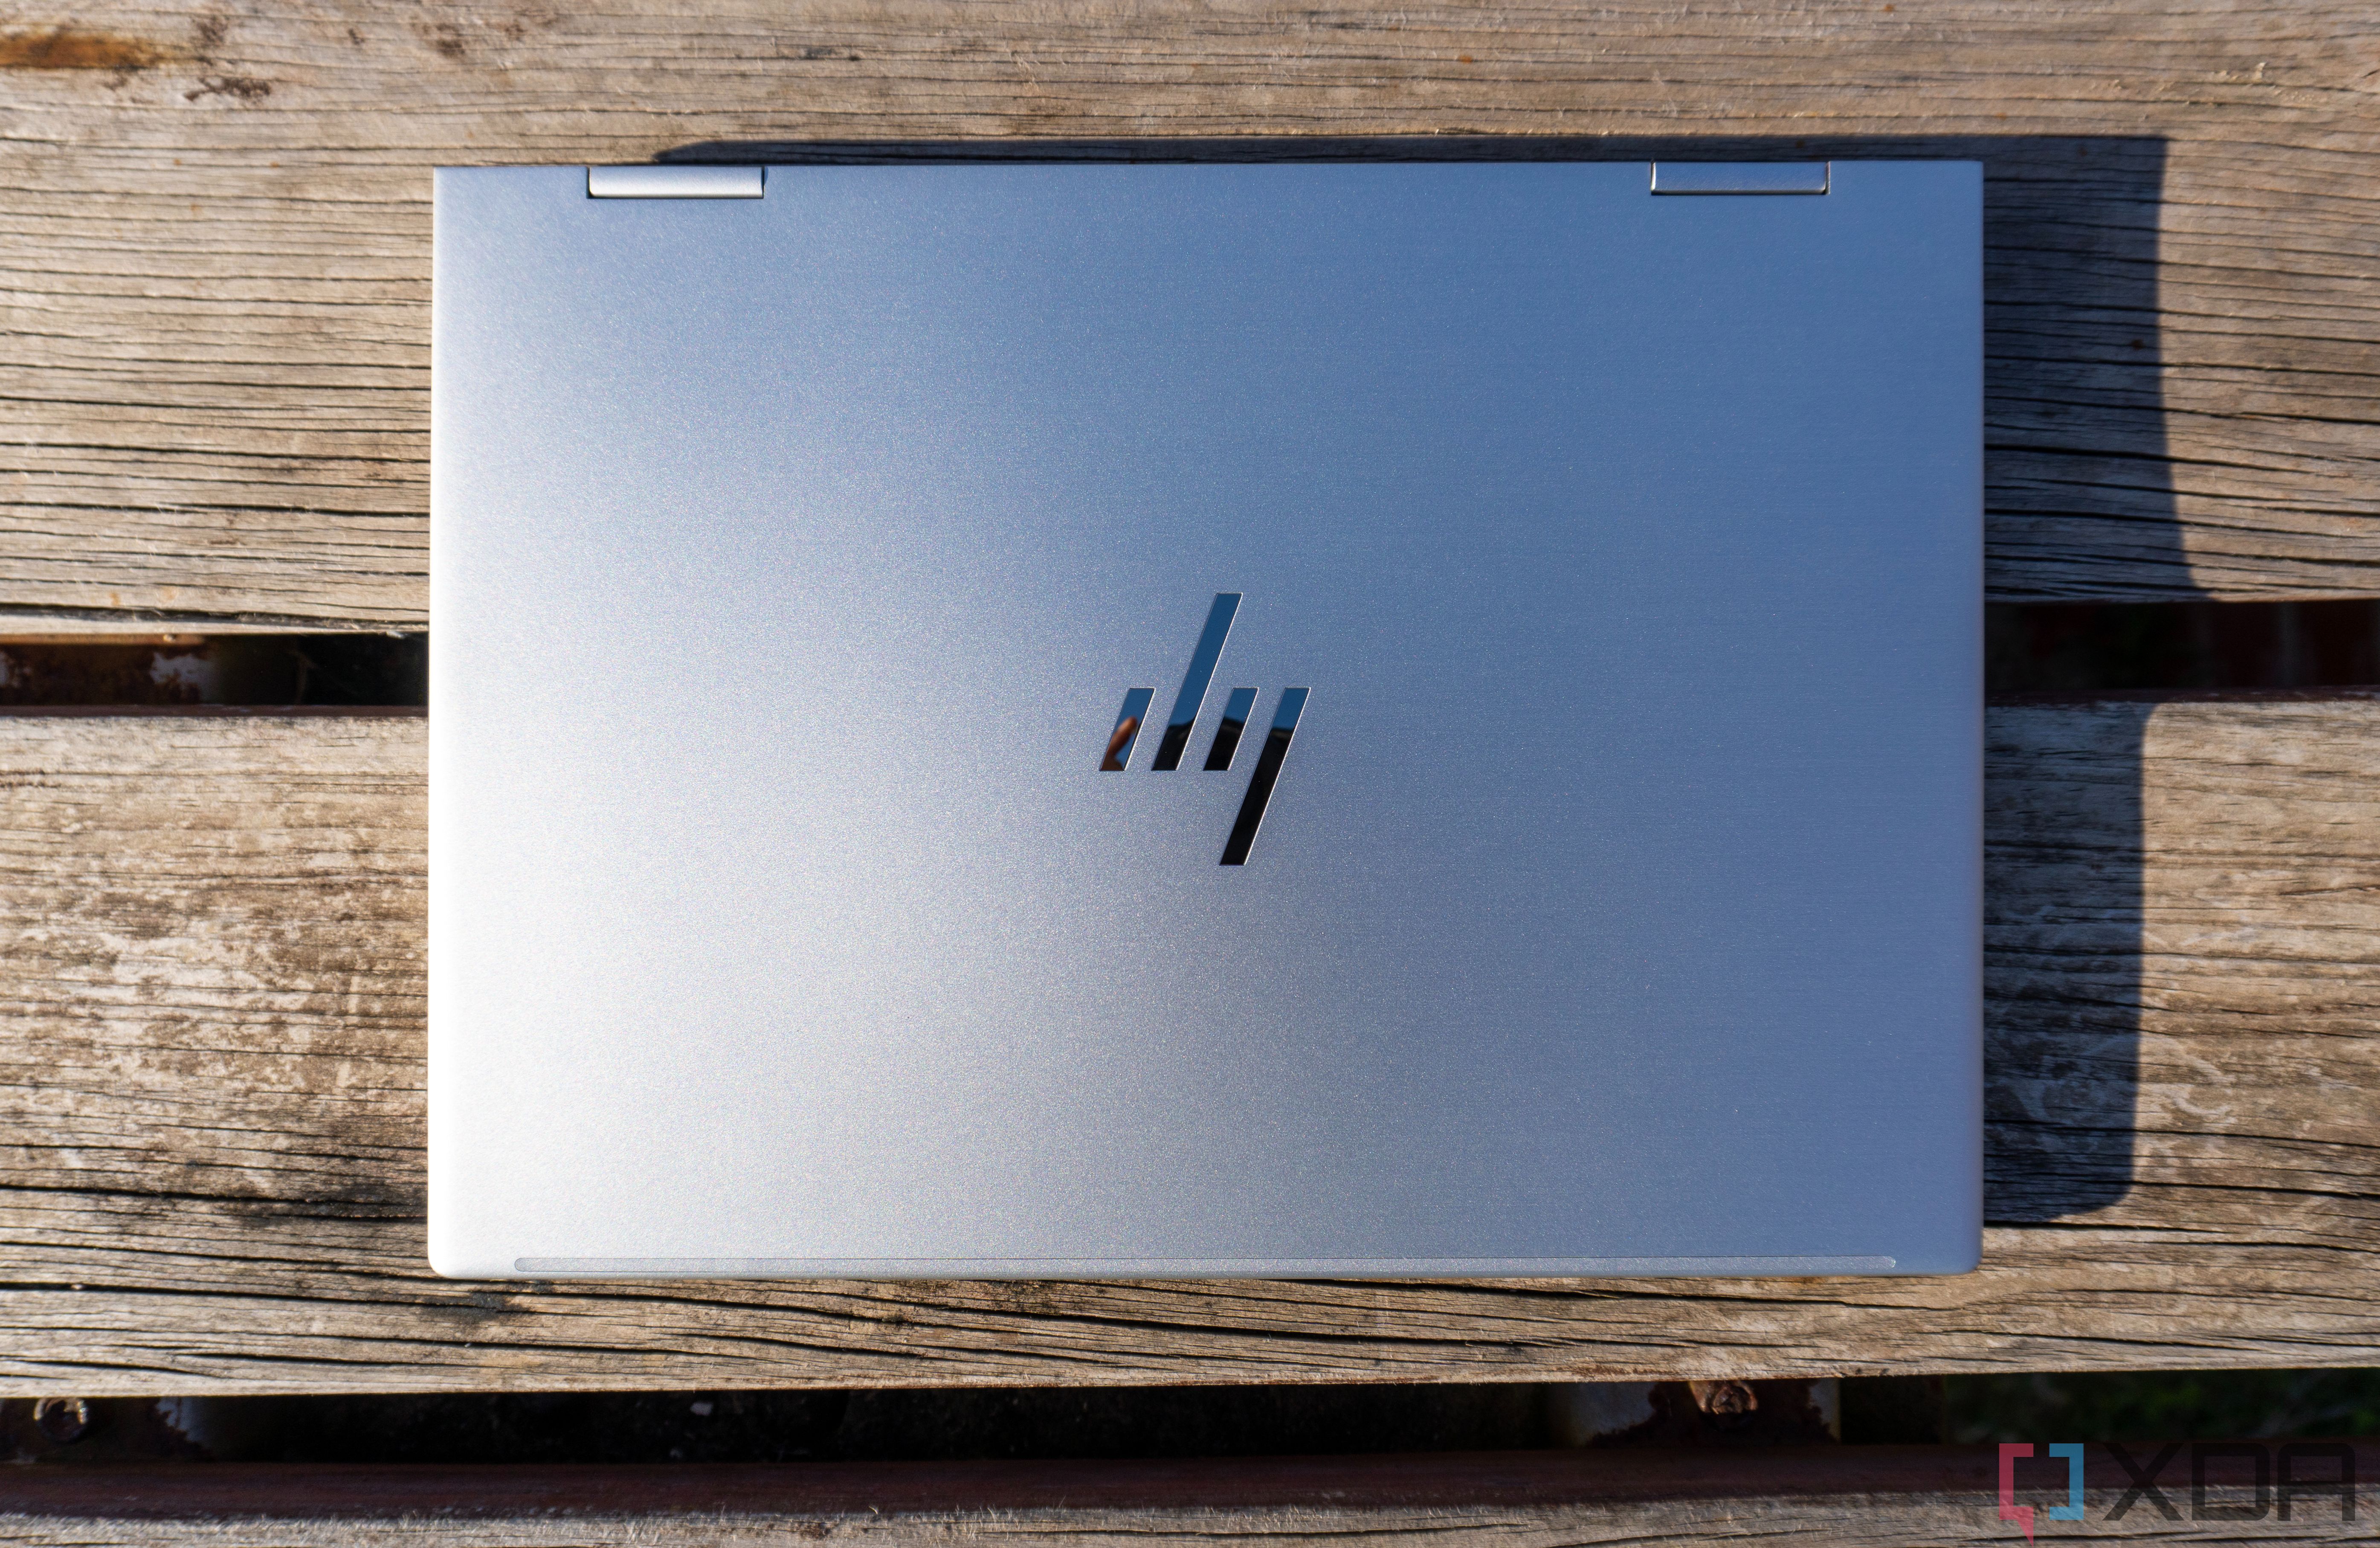 Top-down view of the HP Envy x360 with lid closed.  Laptop sitting on a wooden table.